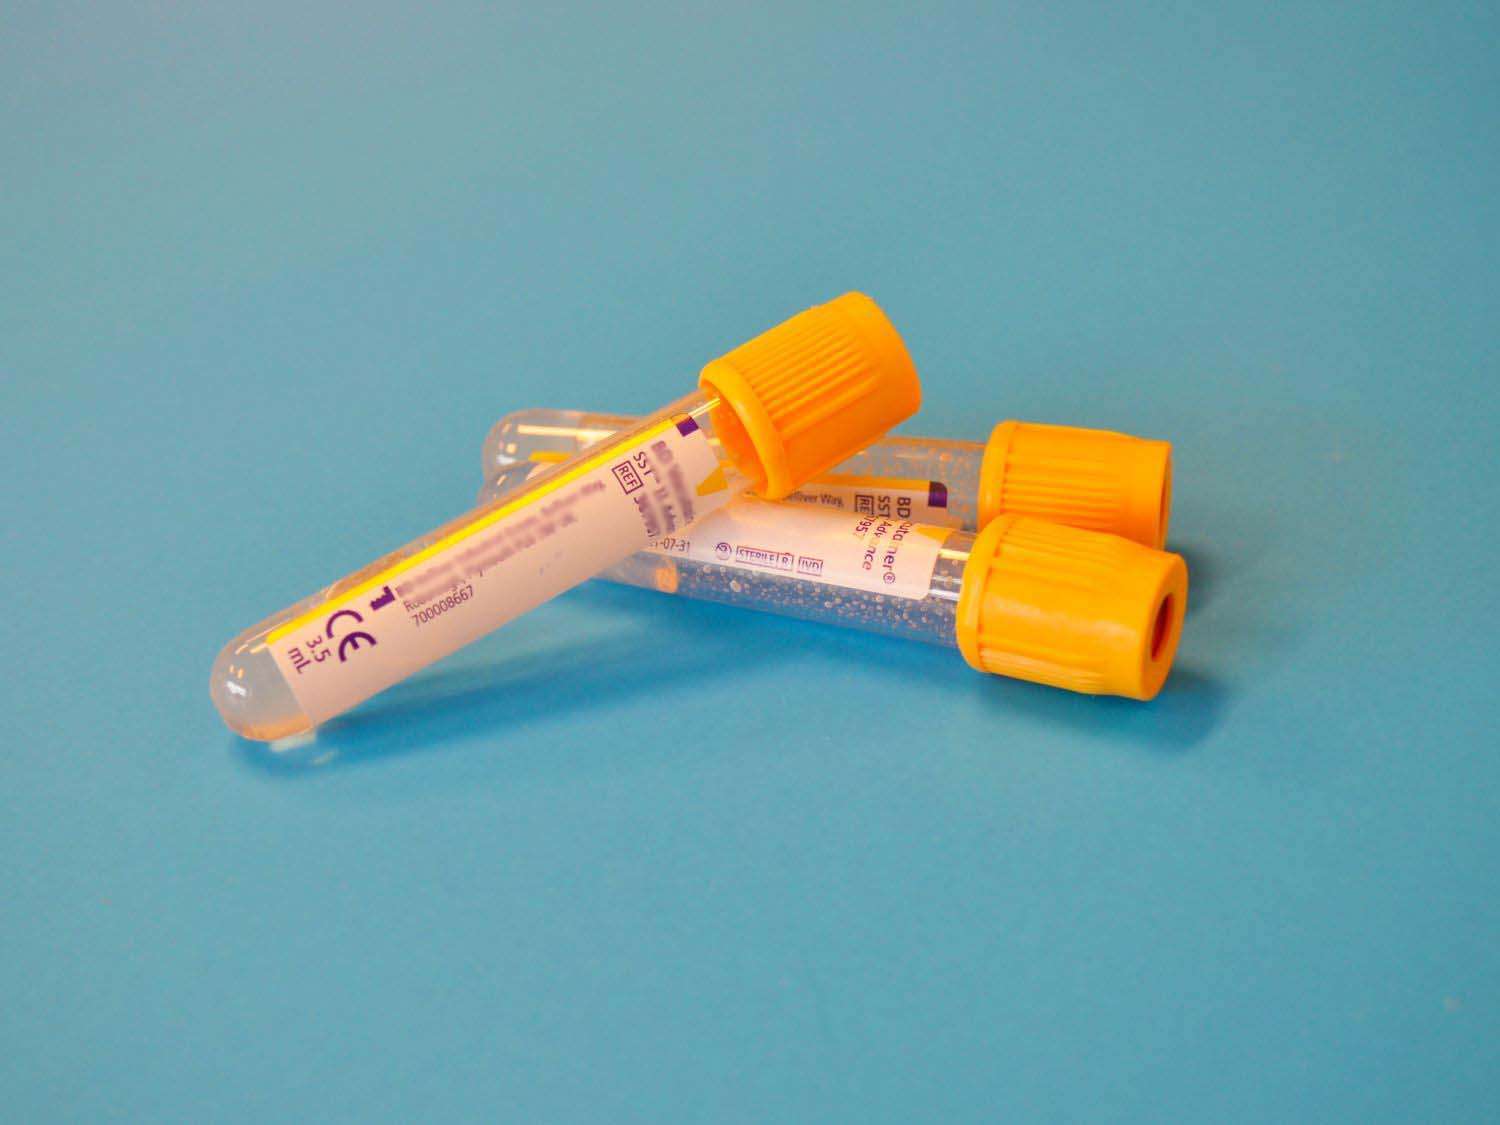 Blood samples for syphilis screening and testing